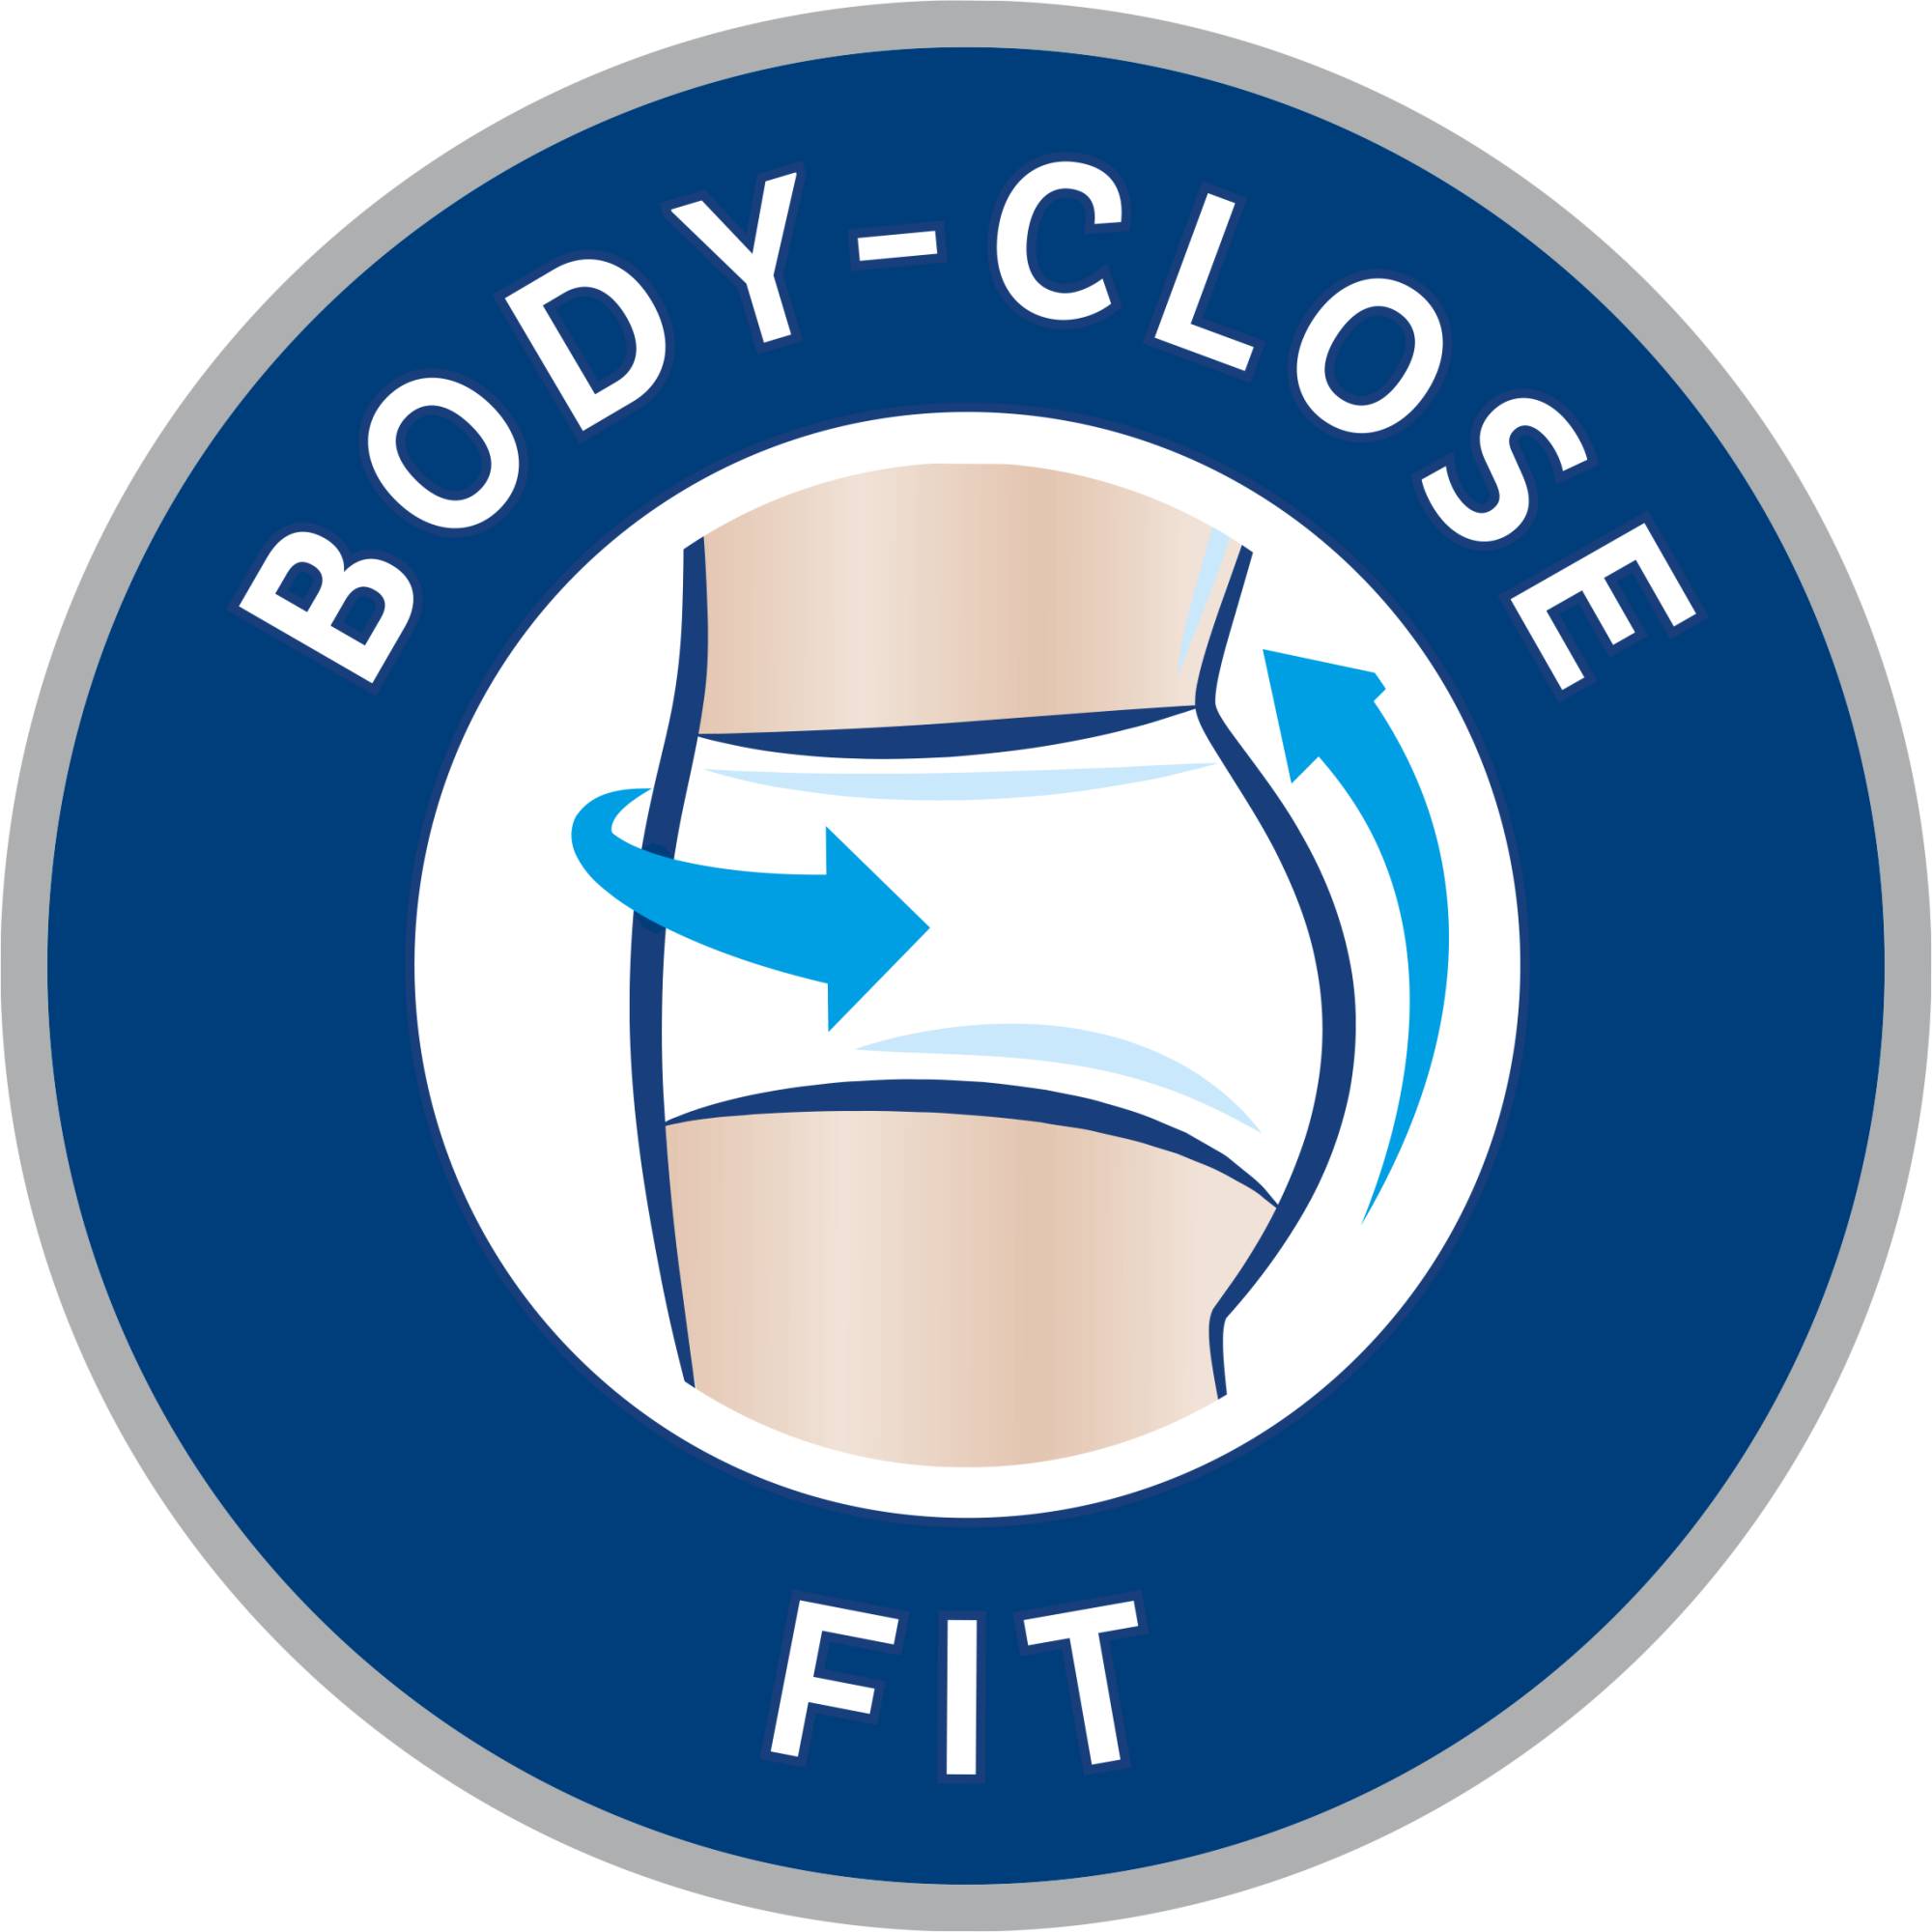 Body-close fit that gently follows the contours of the body